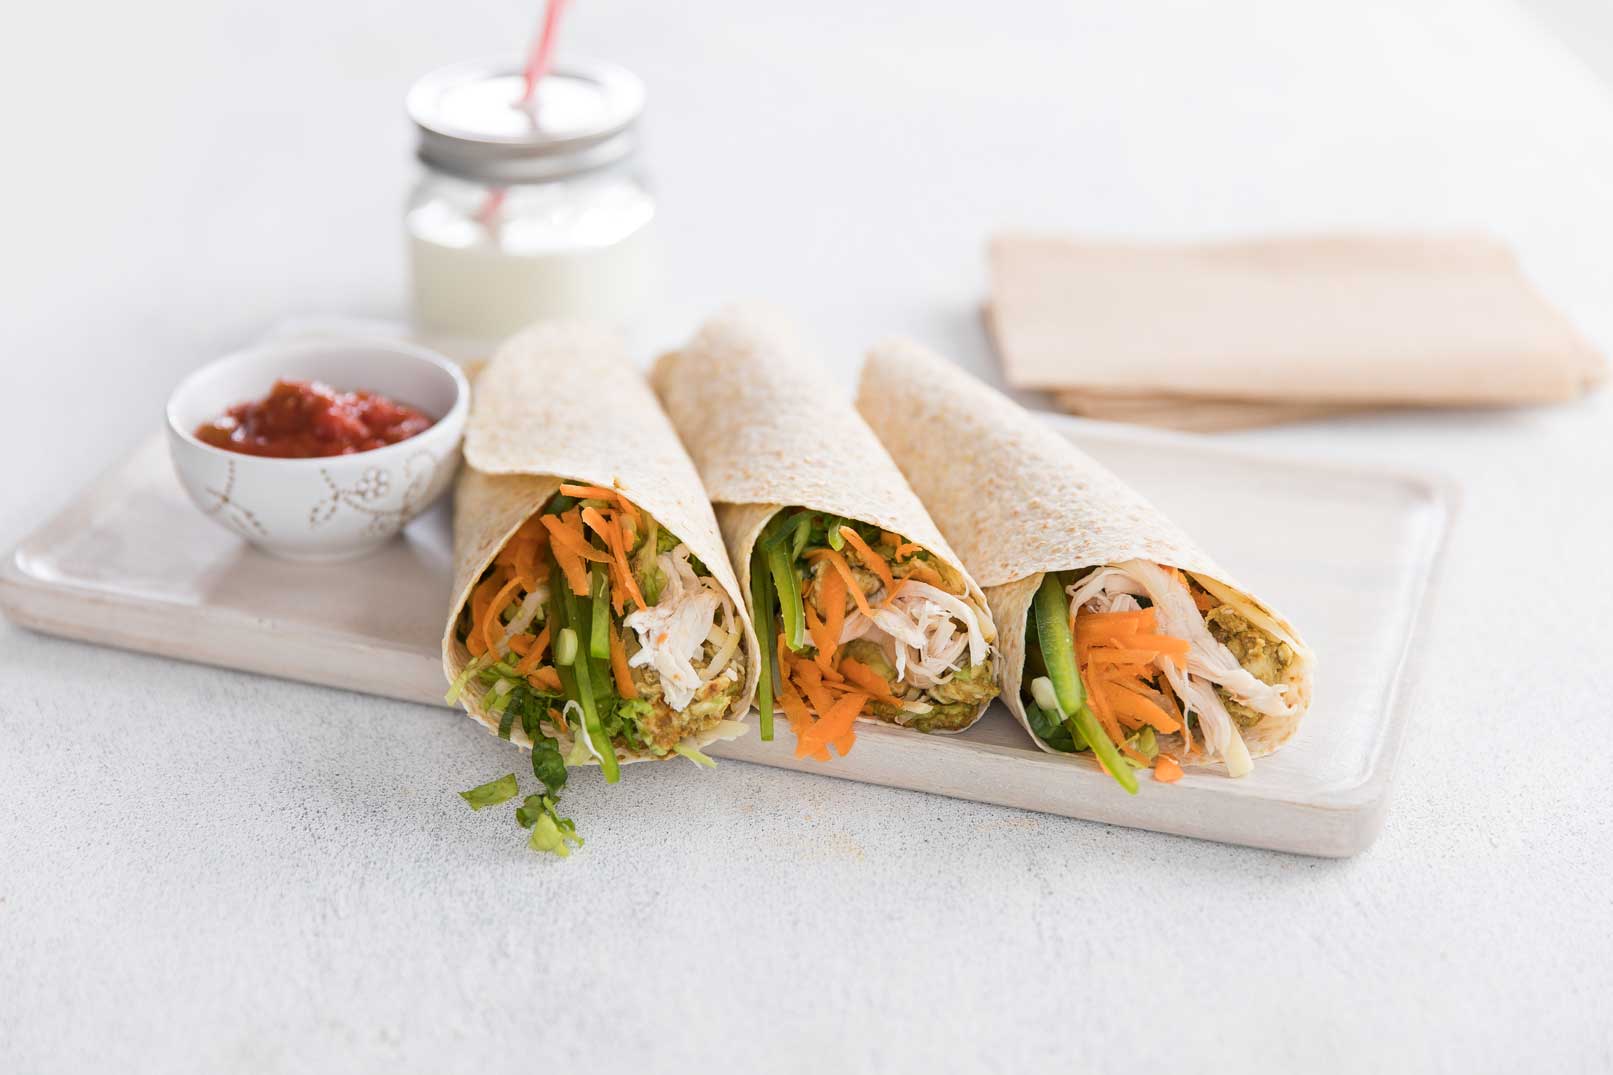 Three chicken fajita roll-ups served on a white cutting board with a small bowl of sauced on the side. A glass jar of milk with a straw and brown paper napkins are in the background.